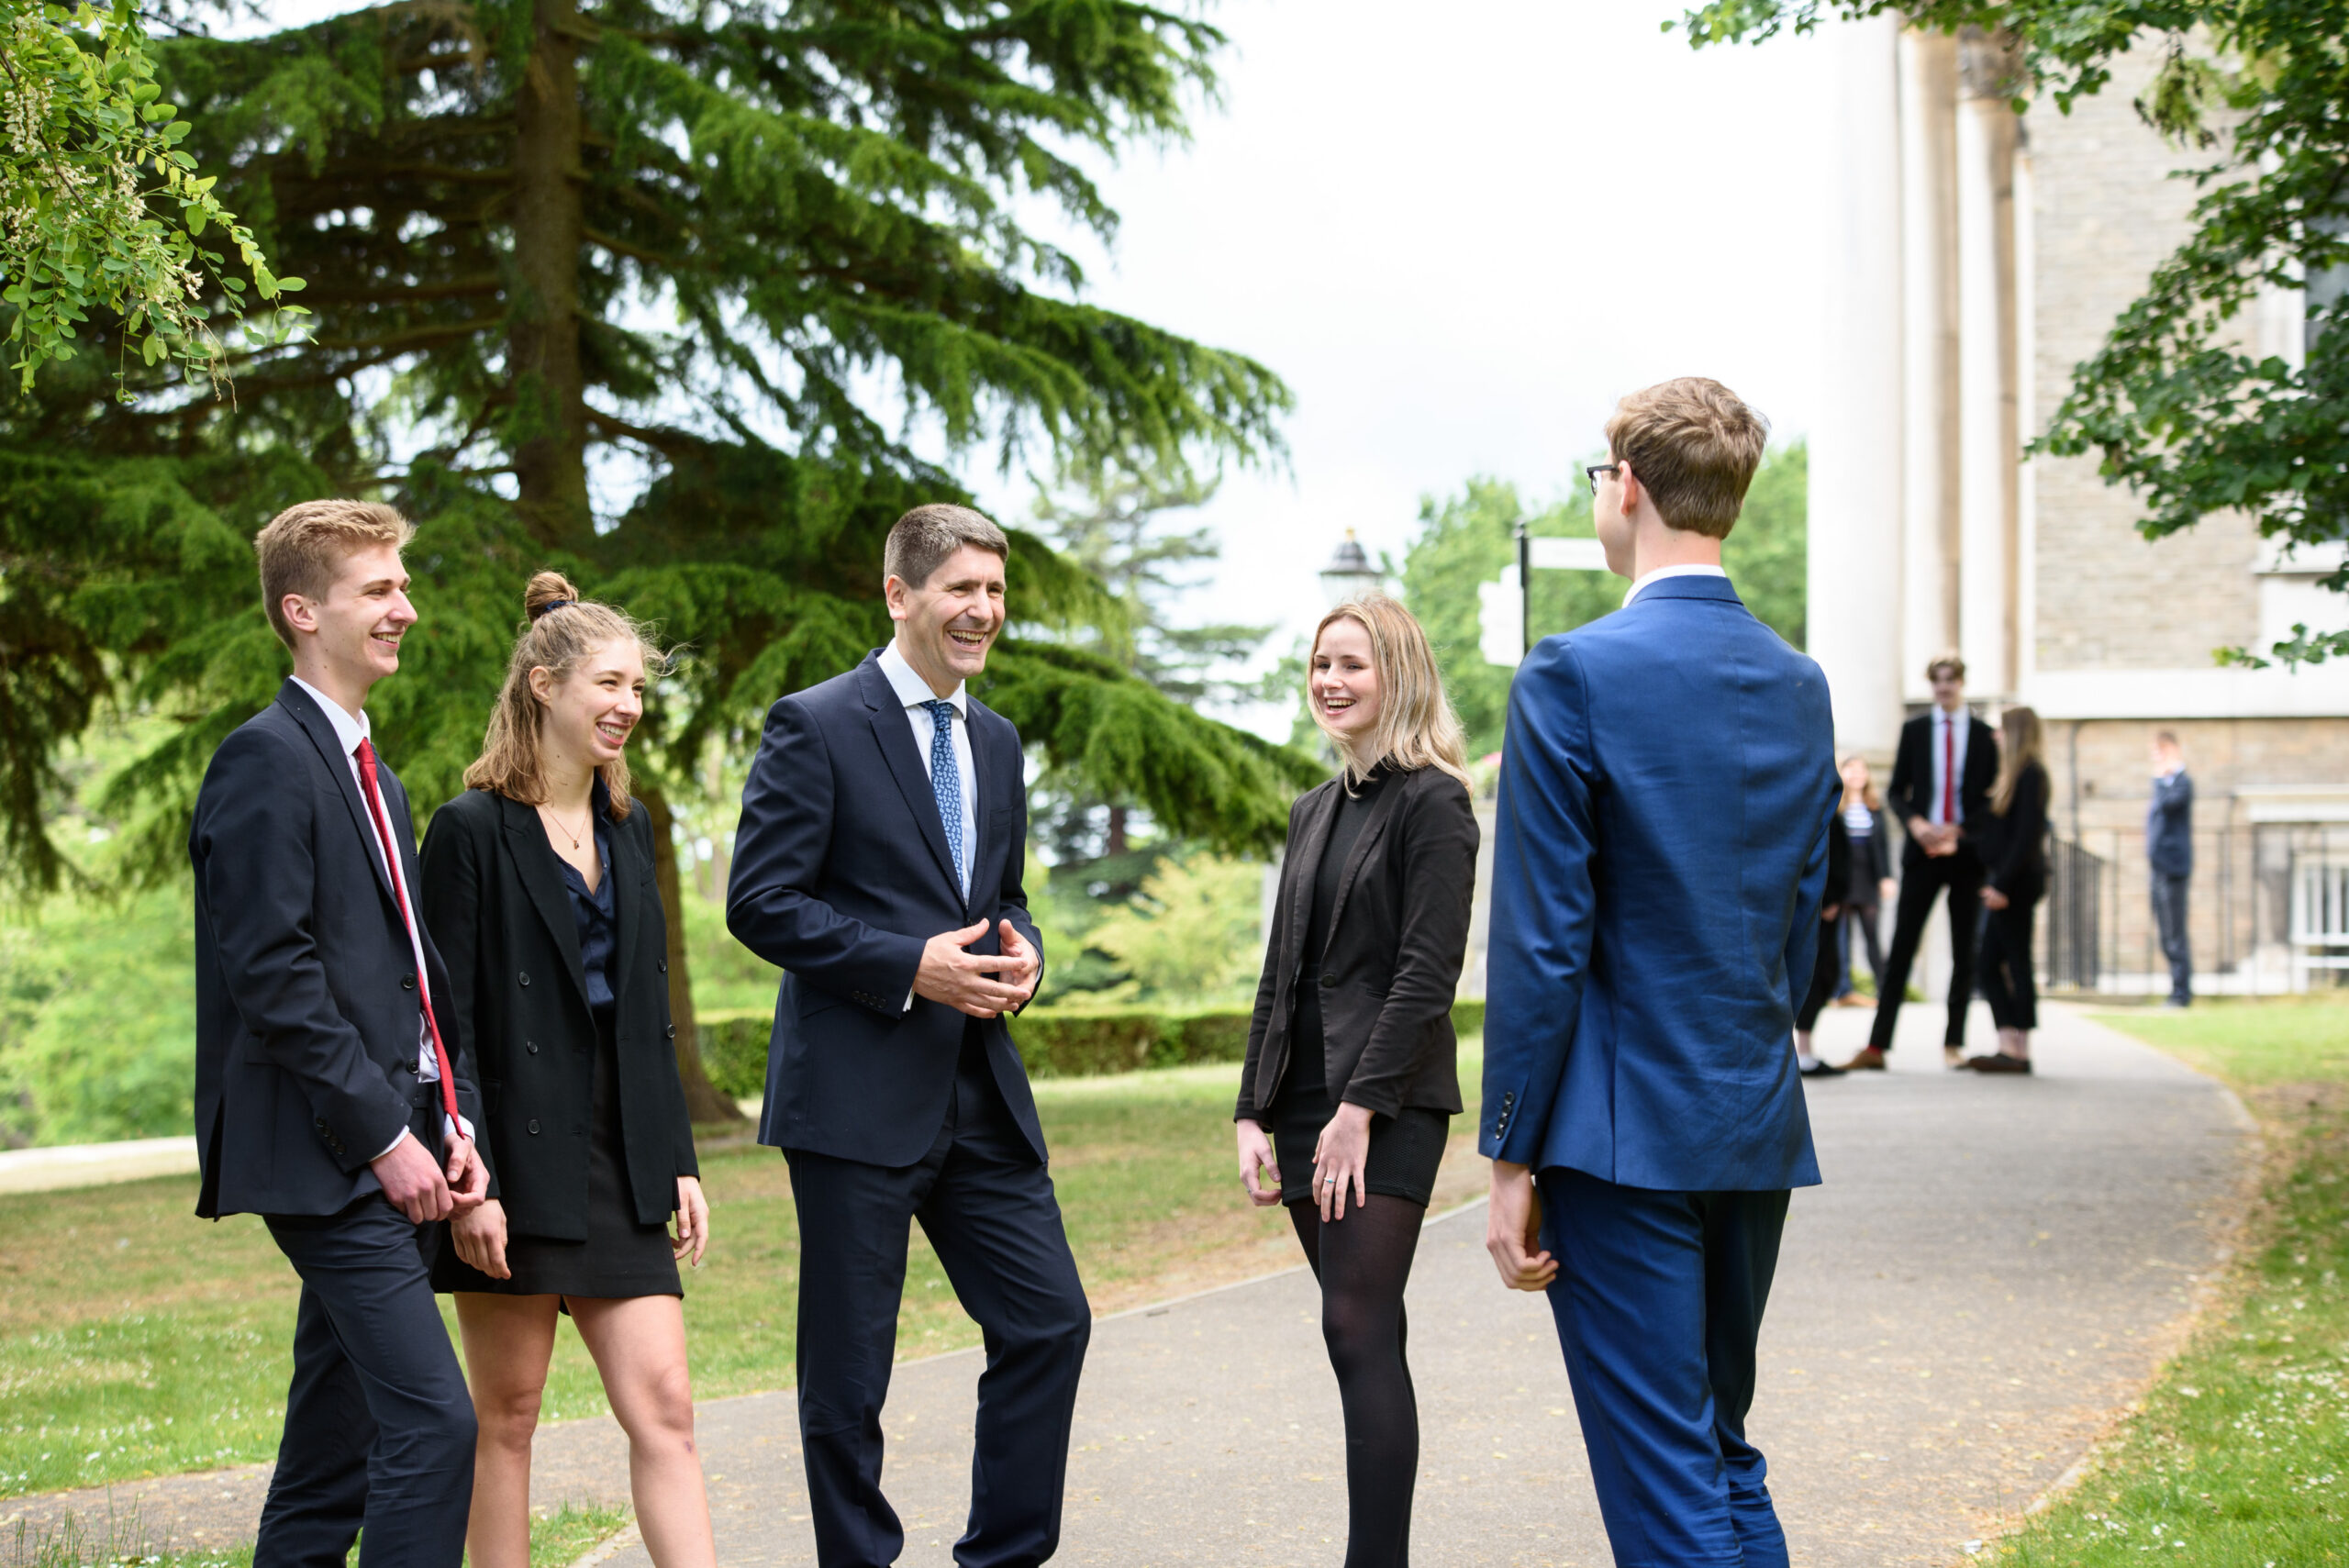 Headmaster's welcome - extending a warm welcome to Claremont